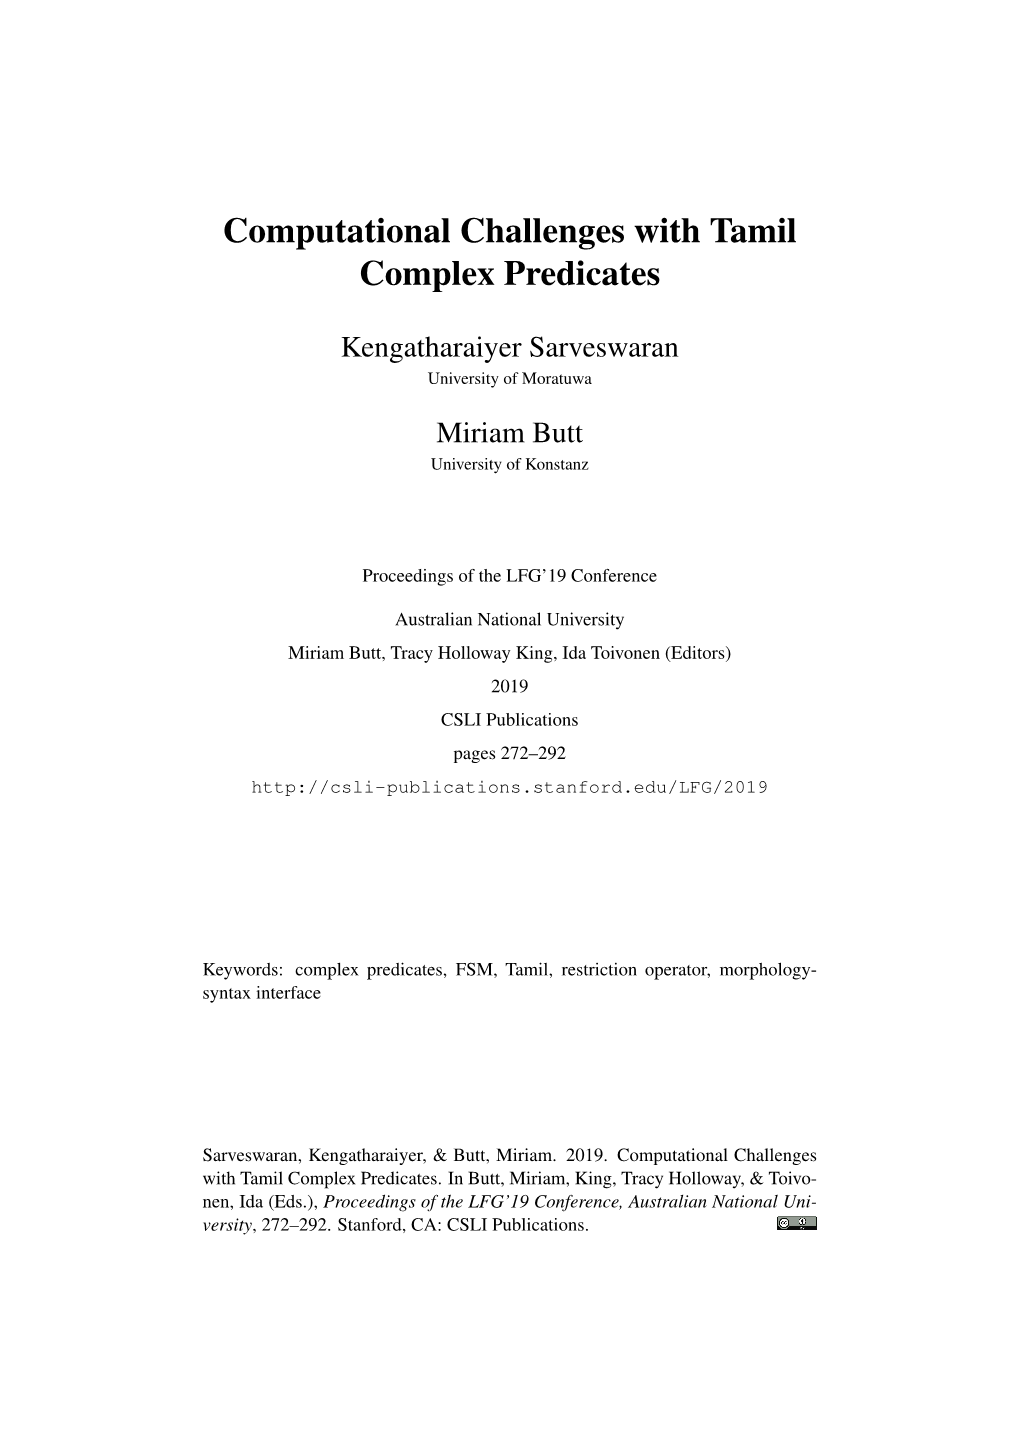 Computational Challenges with Tamil Complex Predicates